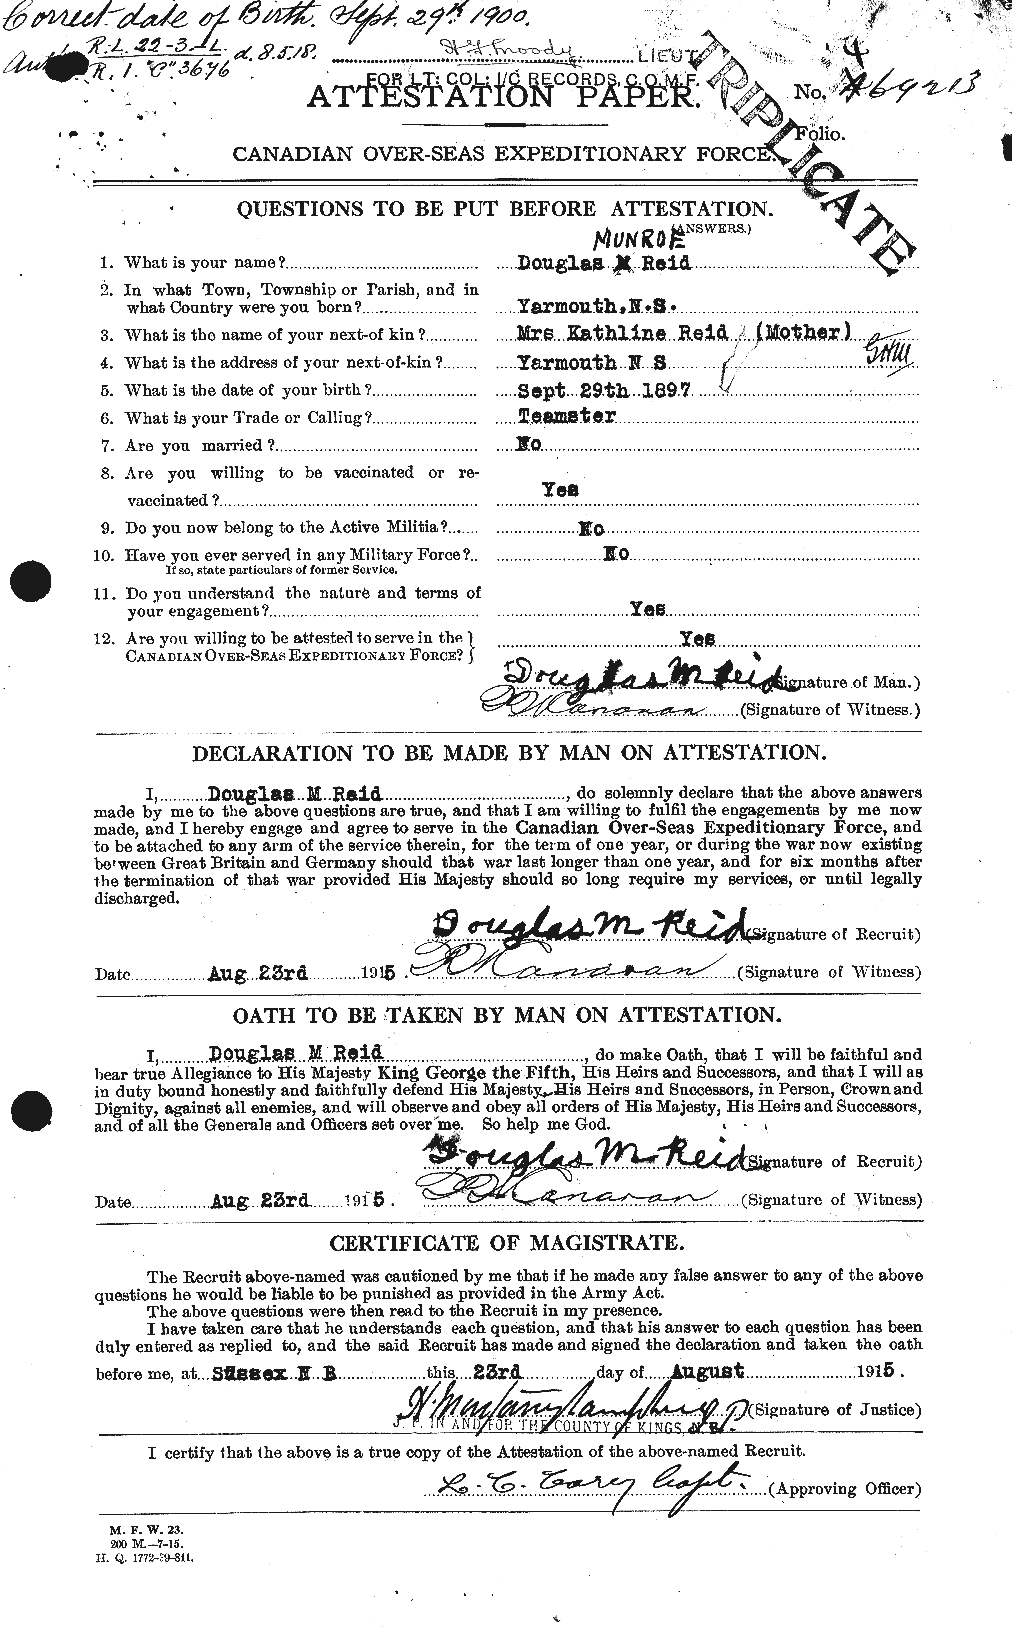 Personnel Records of the First World War - CEF 597970a